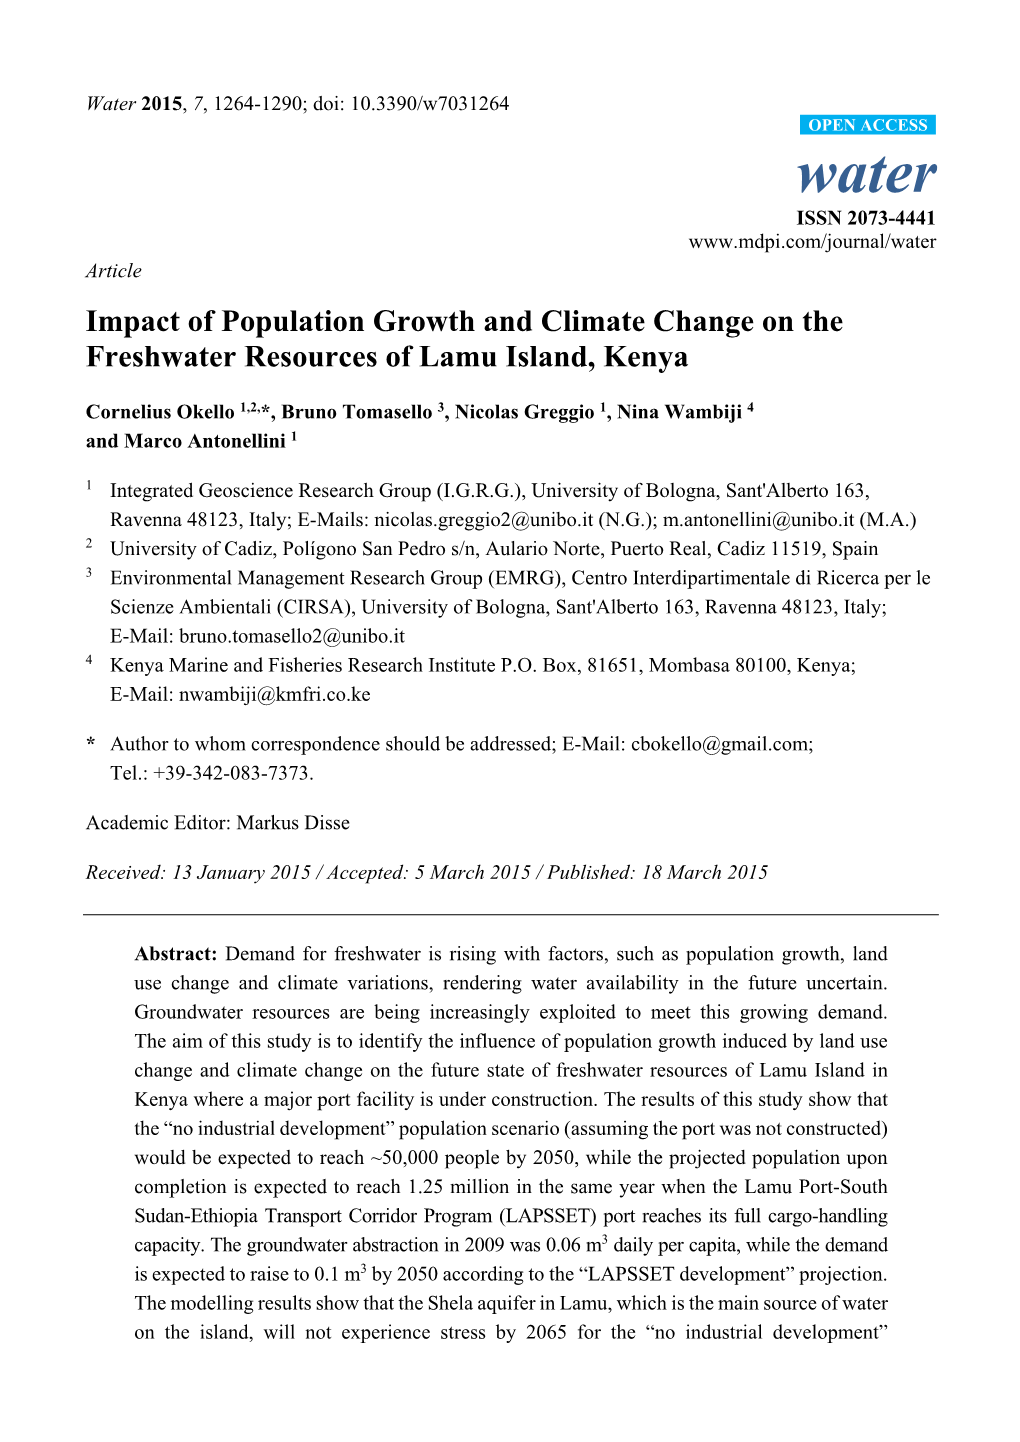 Impact of Population Growth and Climate Change on the Freshwater Resources of Lamu Island, Kenya